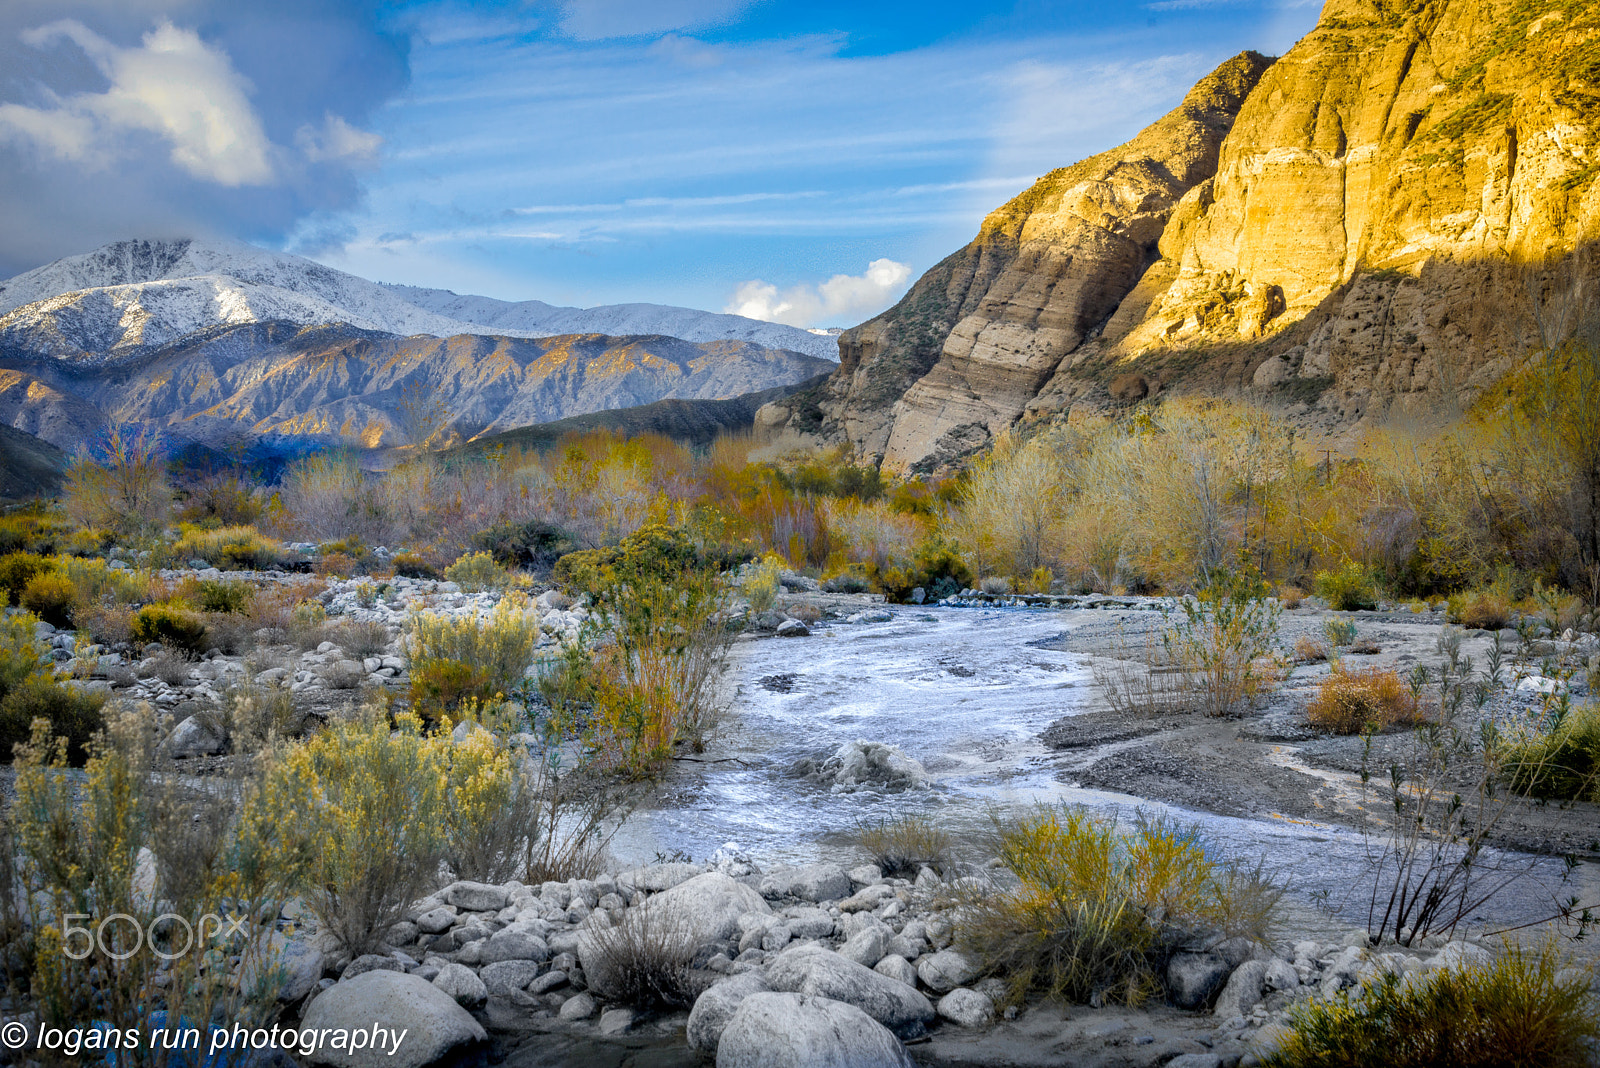 Nikon D800E sample photo. Golden hour in whitewater canyon, palm springs calif. photography